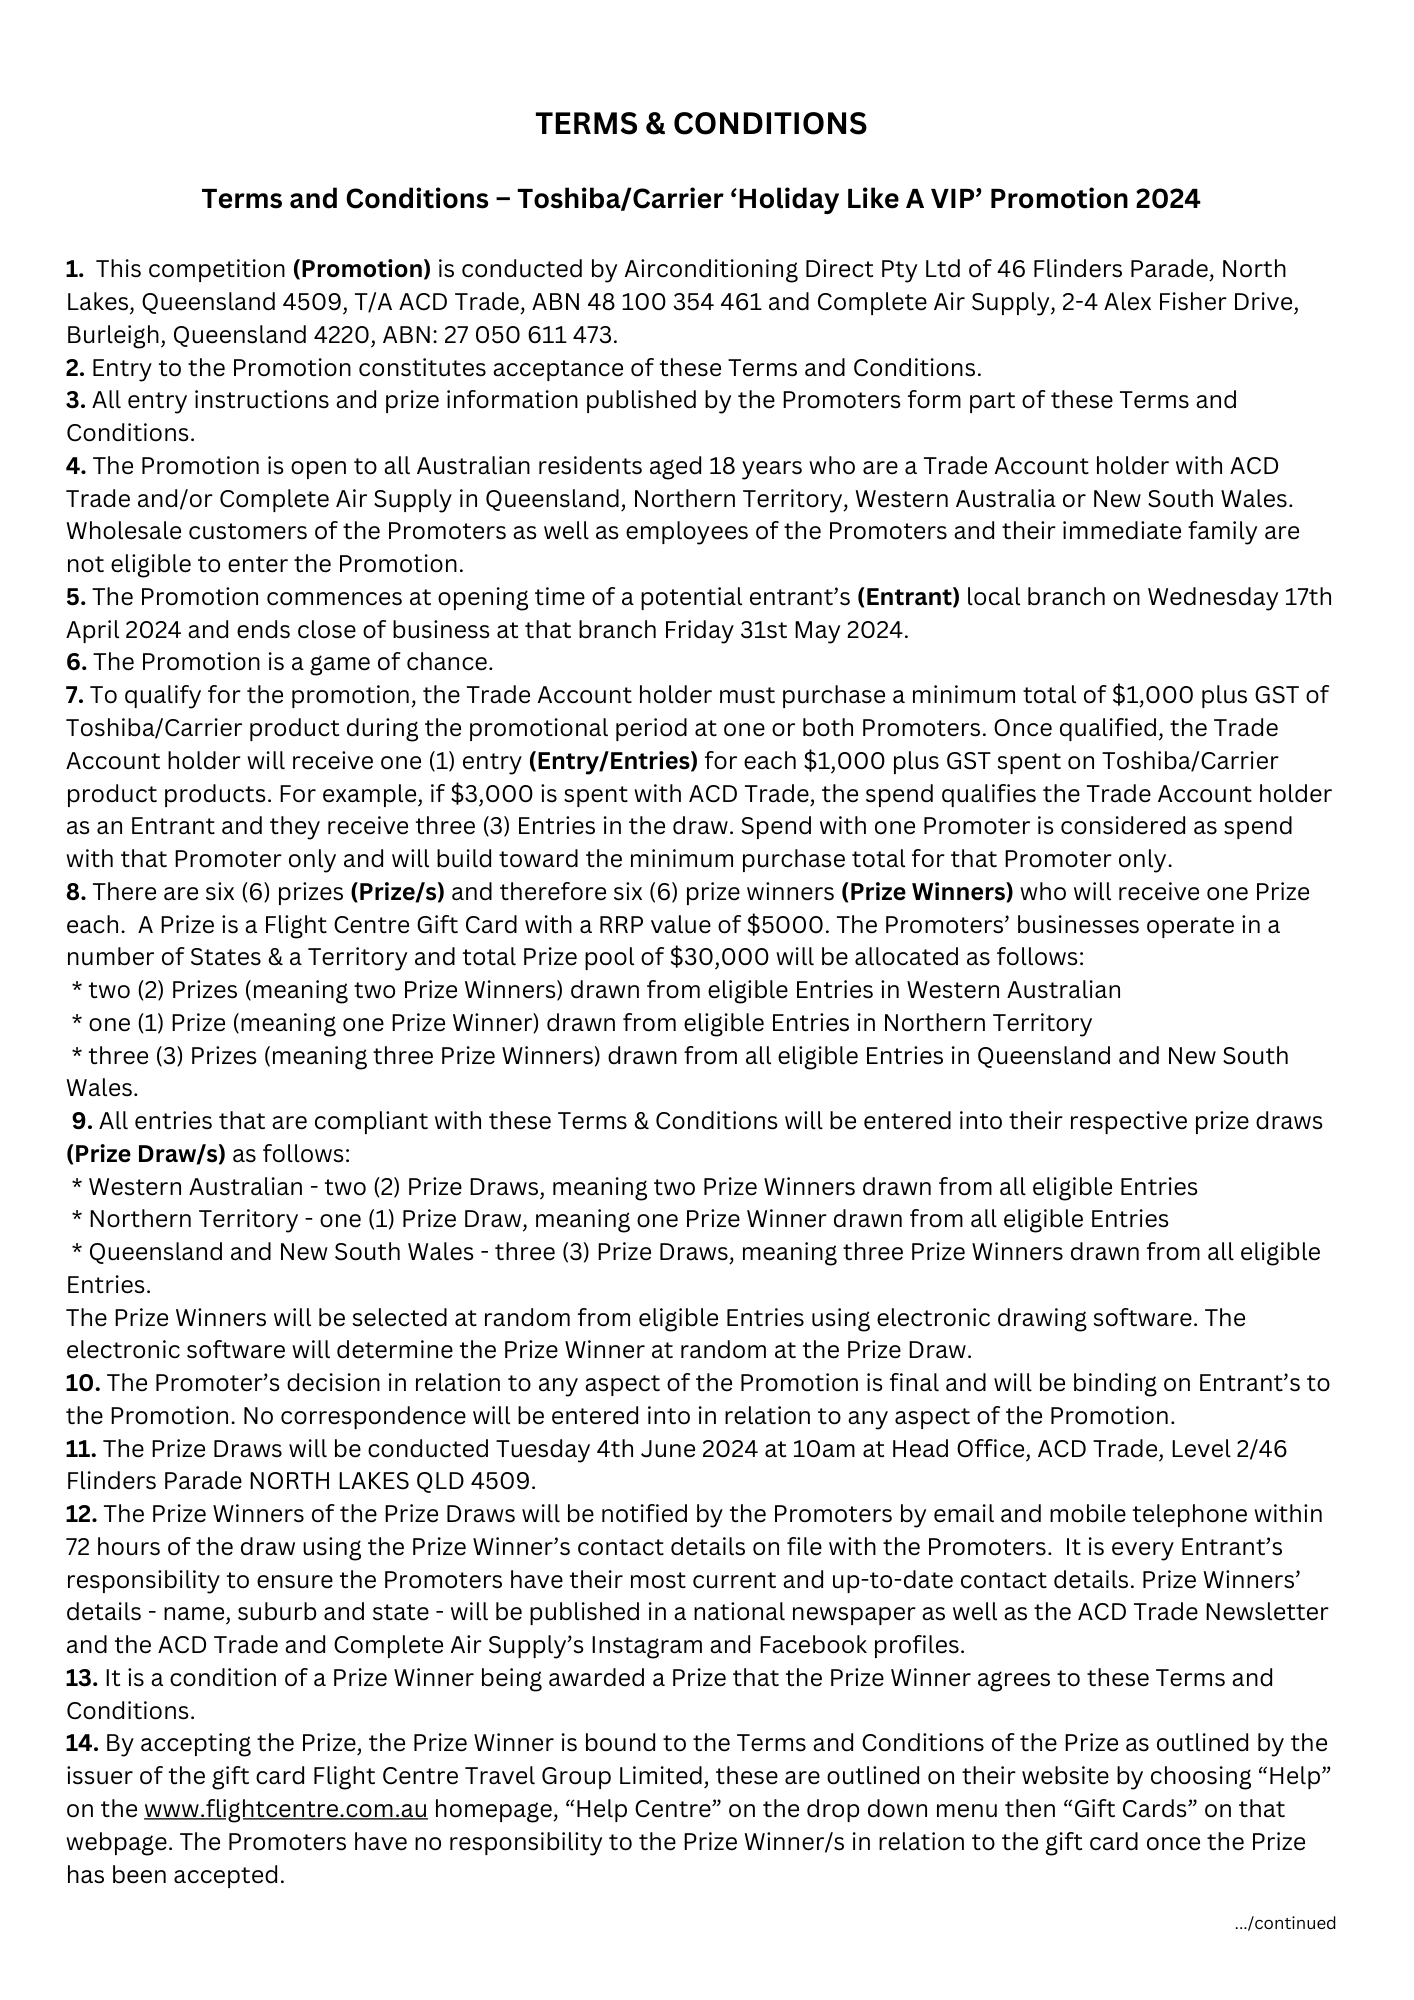 Terms and conditions pg 1